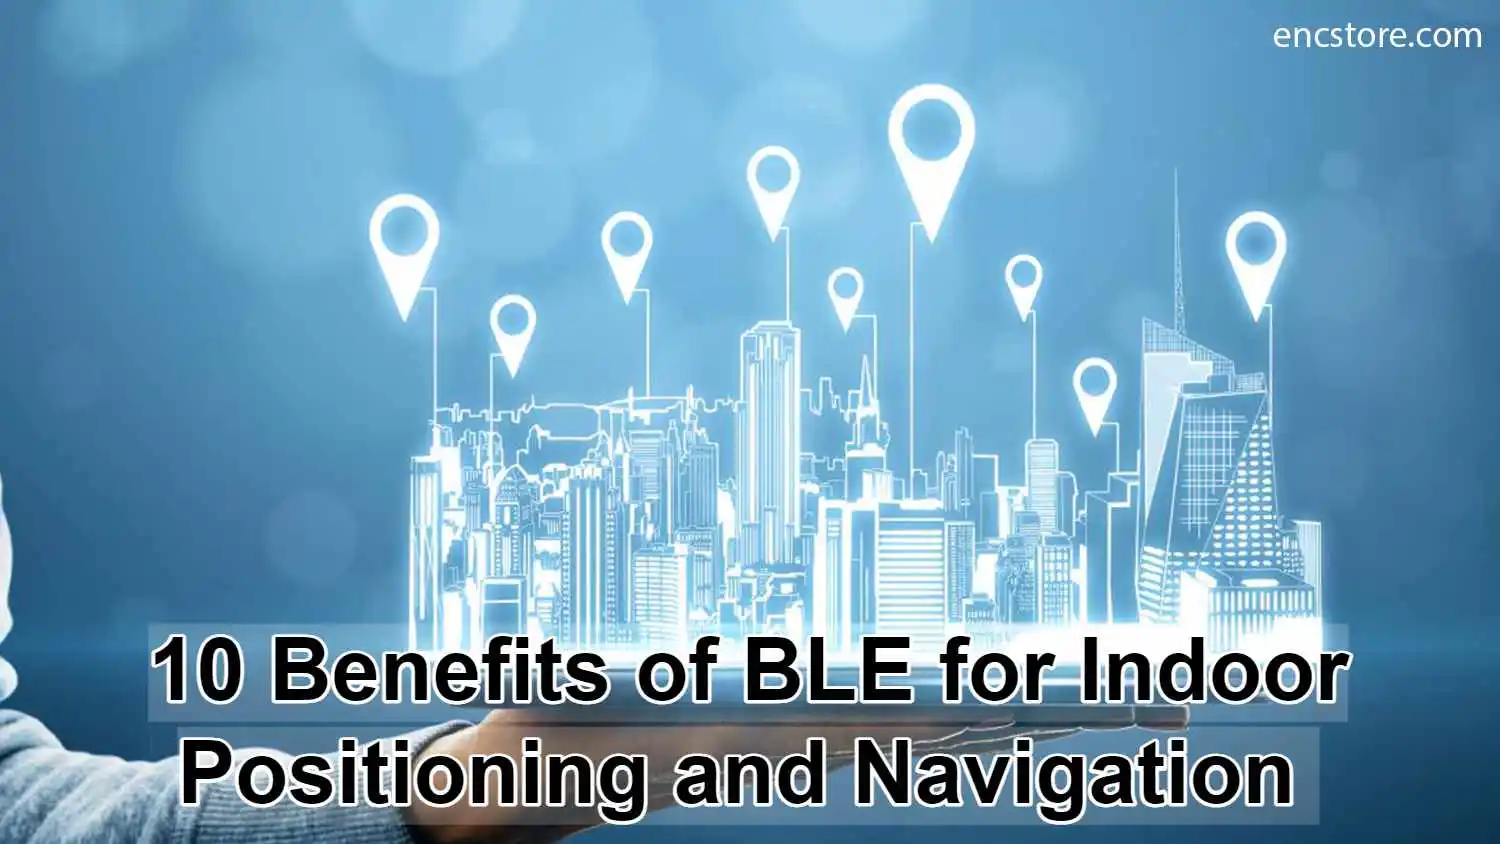 10 Benefits of BLE for Indoor Positioning and Navigation